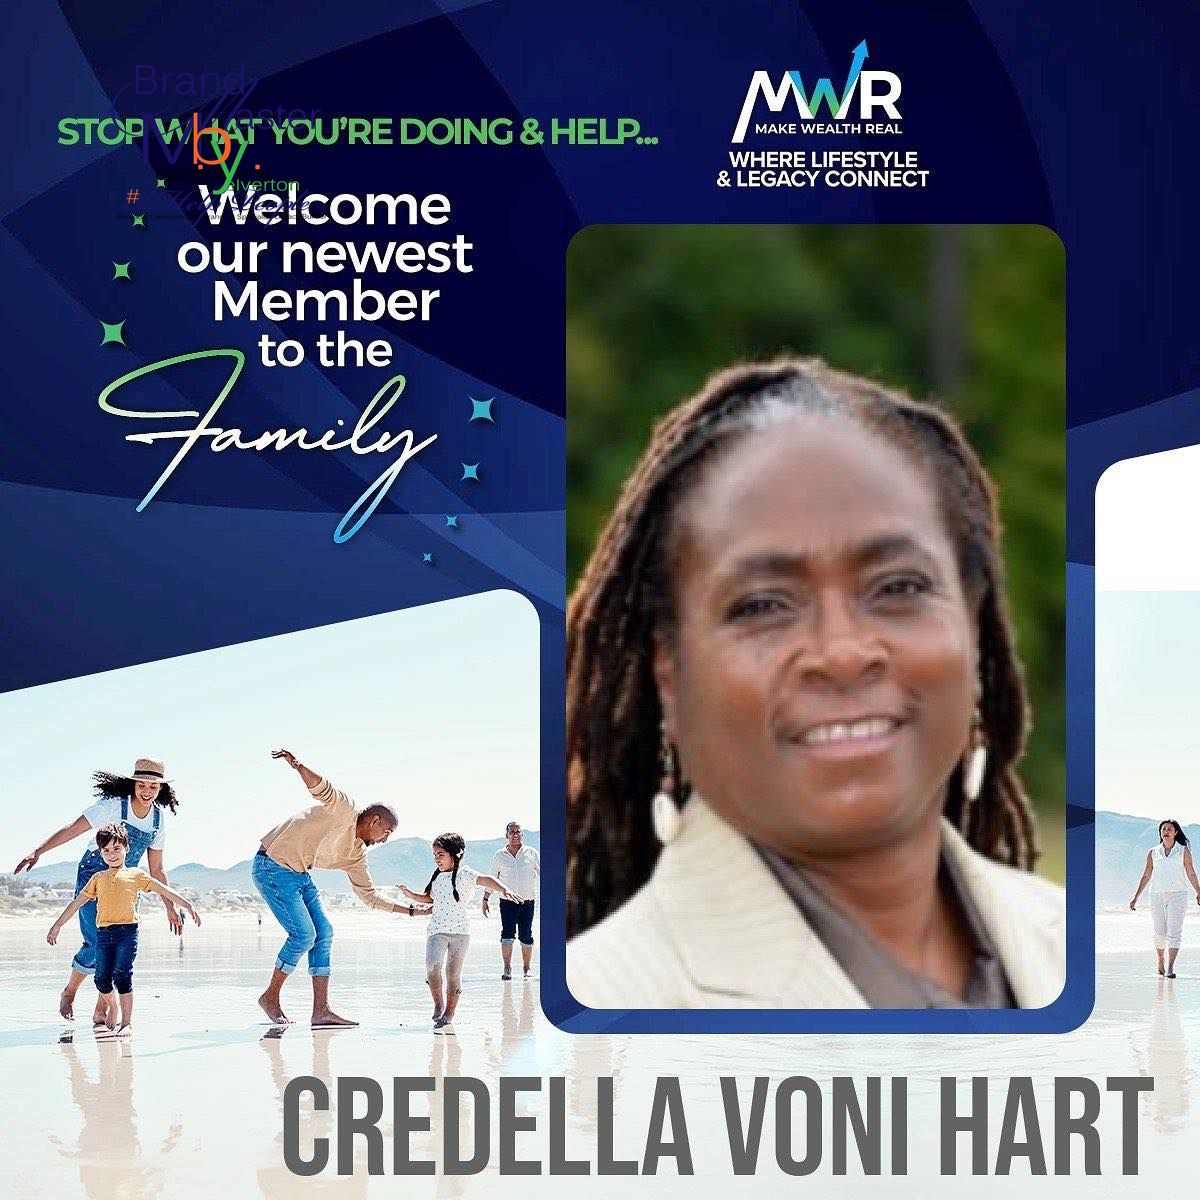 Congrats to Credella Voni Hart, for investing in herself, her future and and trusting our Experts to get her on the other side of money. Excited to see your #72hrMoneyChallengeResults! Quick Question: Why haven't YOU taken the Challenge yet? #MWRMovement #Project10k